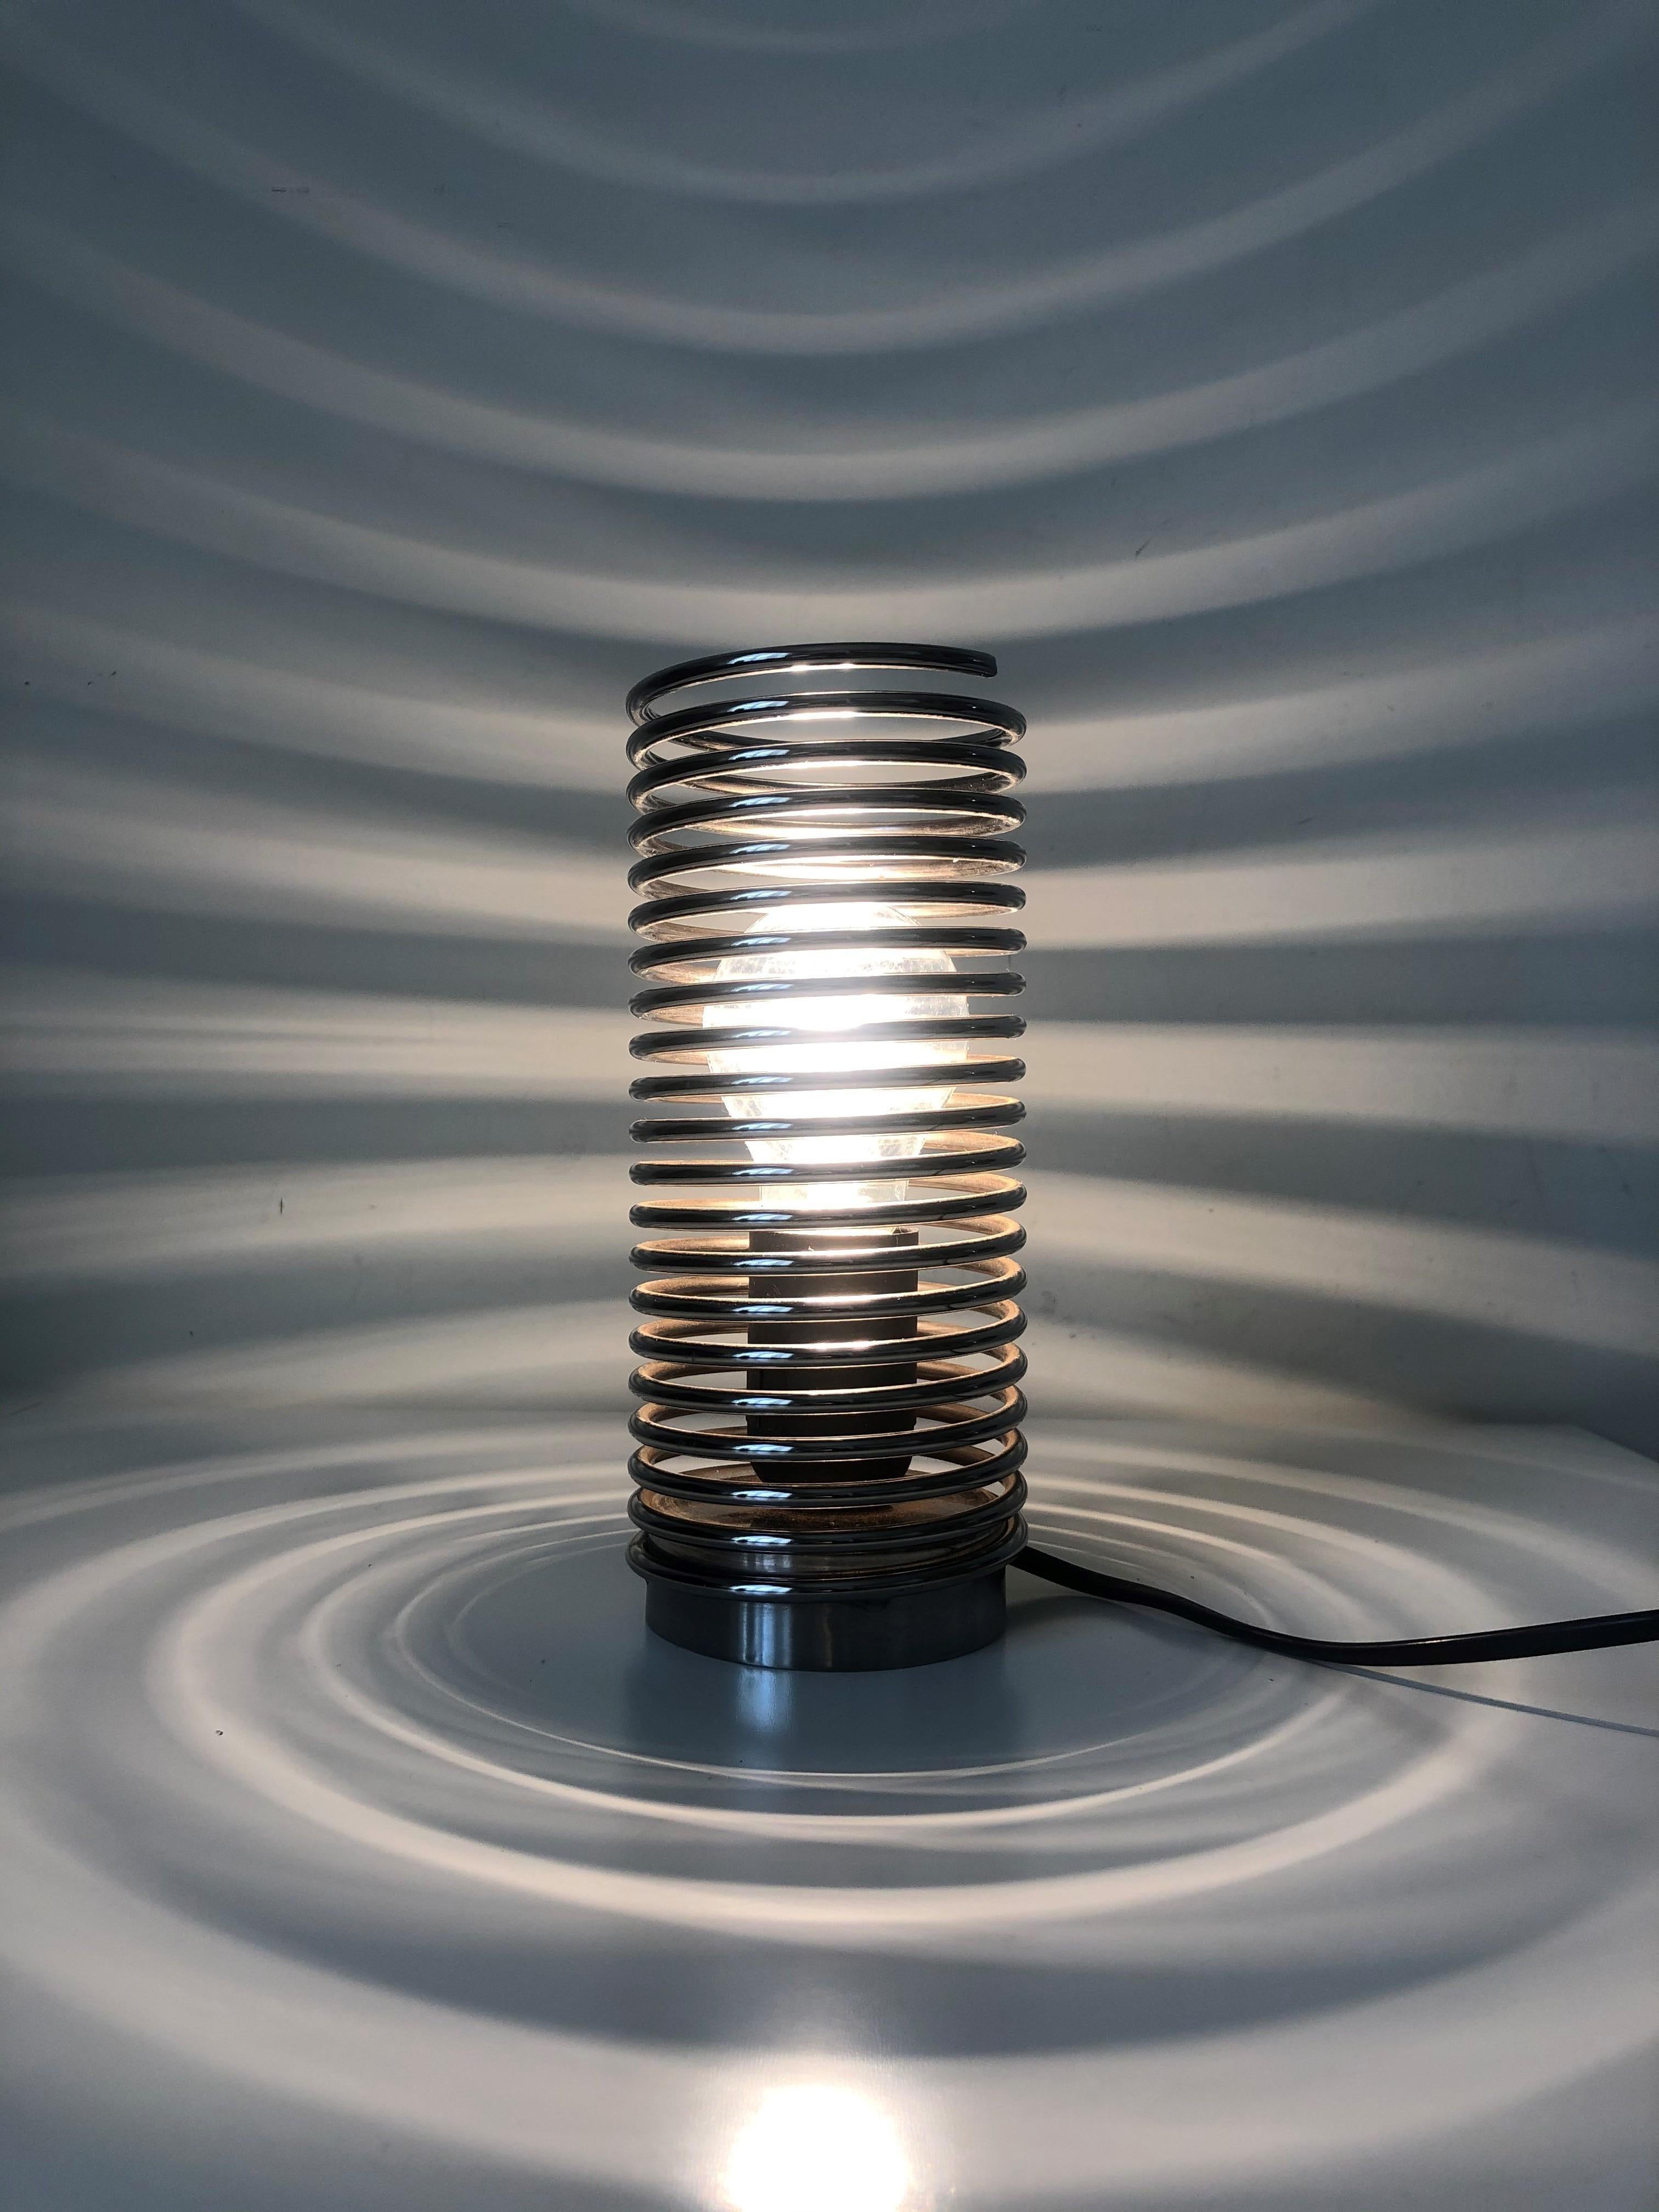 Unique Postmodern pair of spiral table lamps from 1990s. These pieces were made during the 1990s in Belgium by Massive.
The Massive lighting company was in origin a bronze foundry and they produced mainly candlesticks, crucifixes and chandeliers in